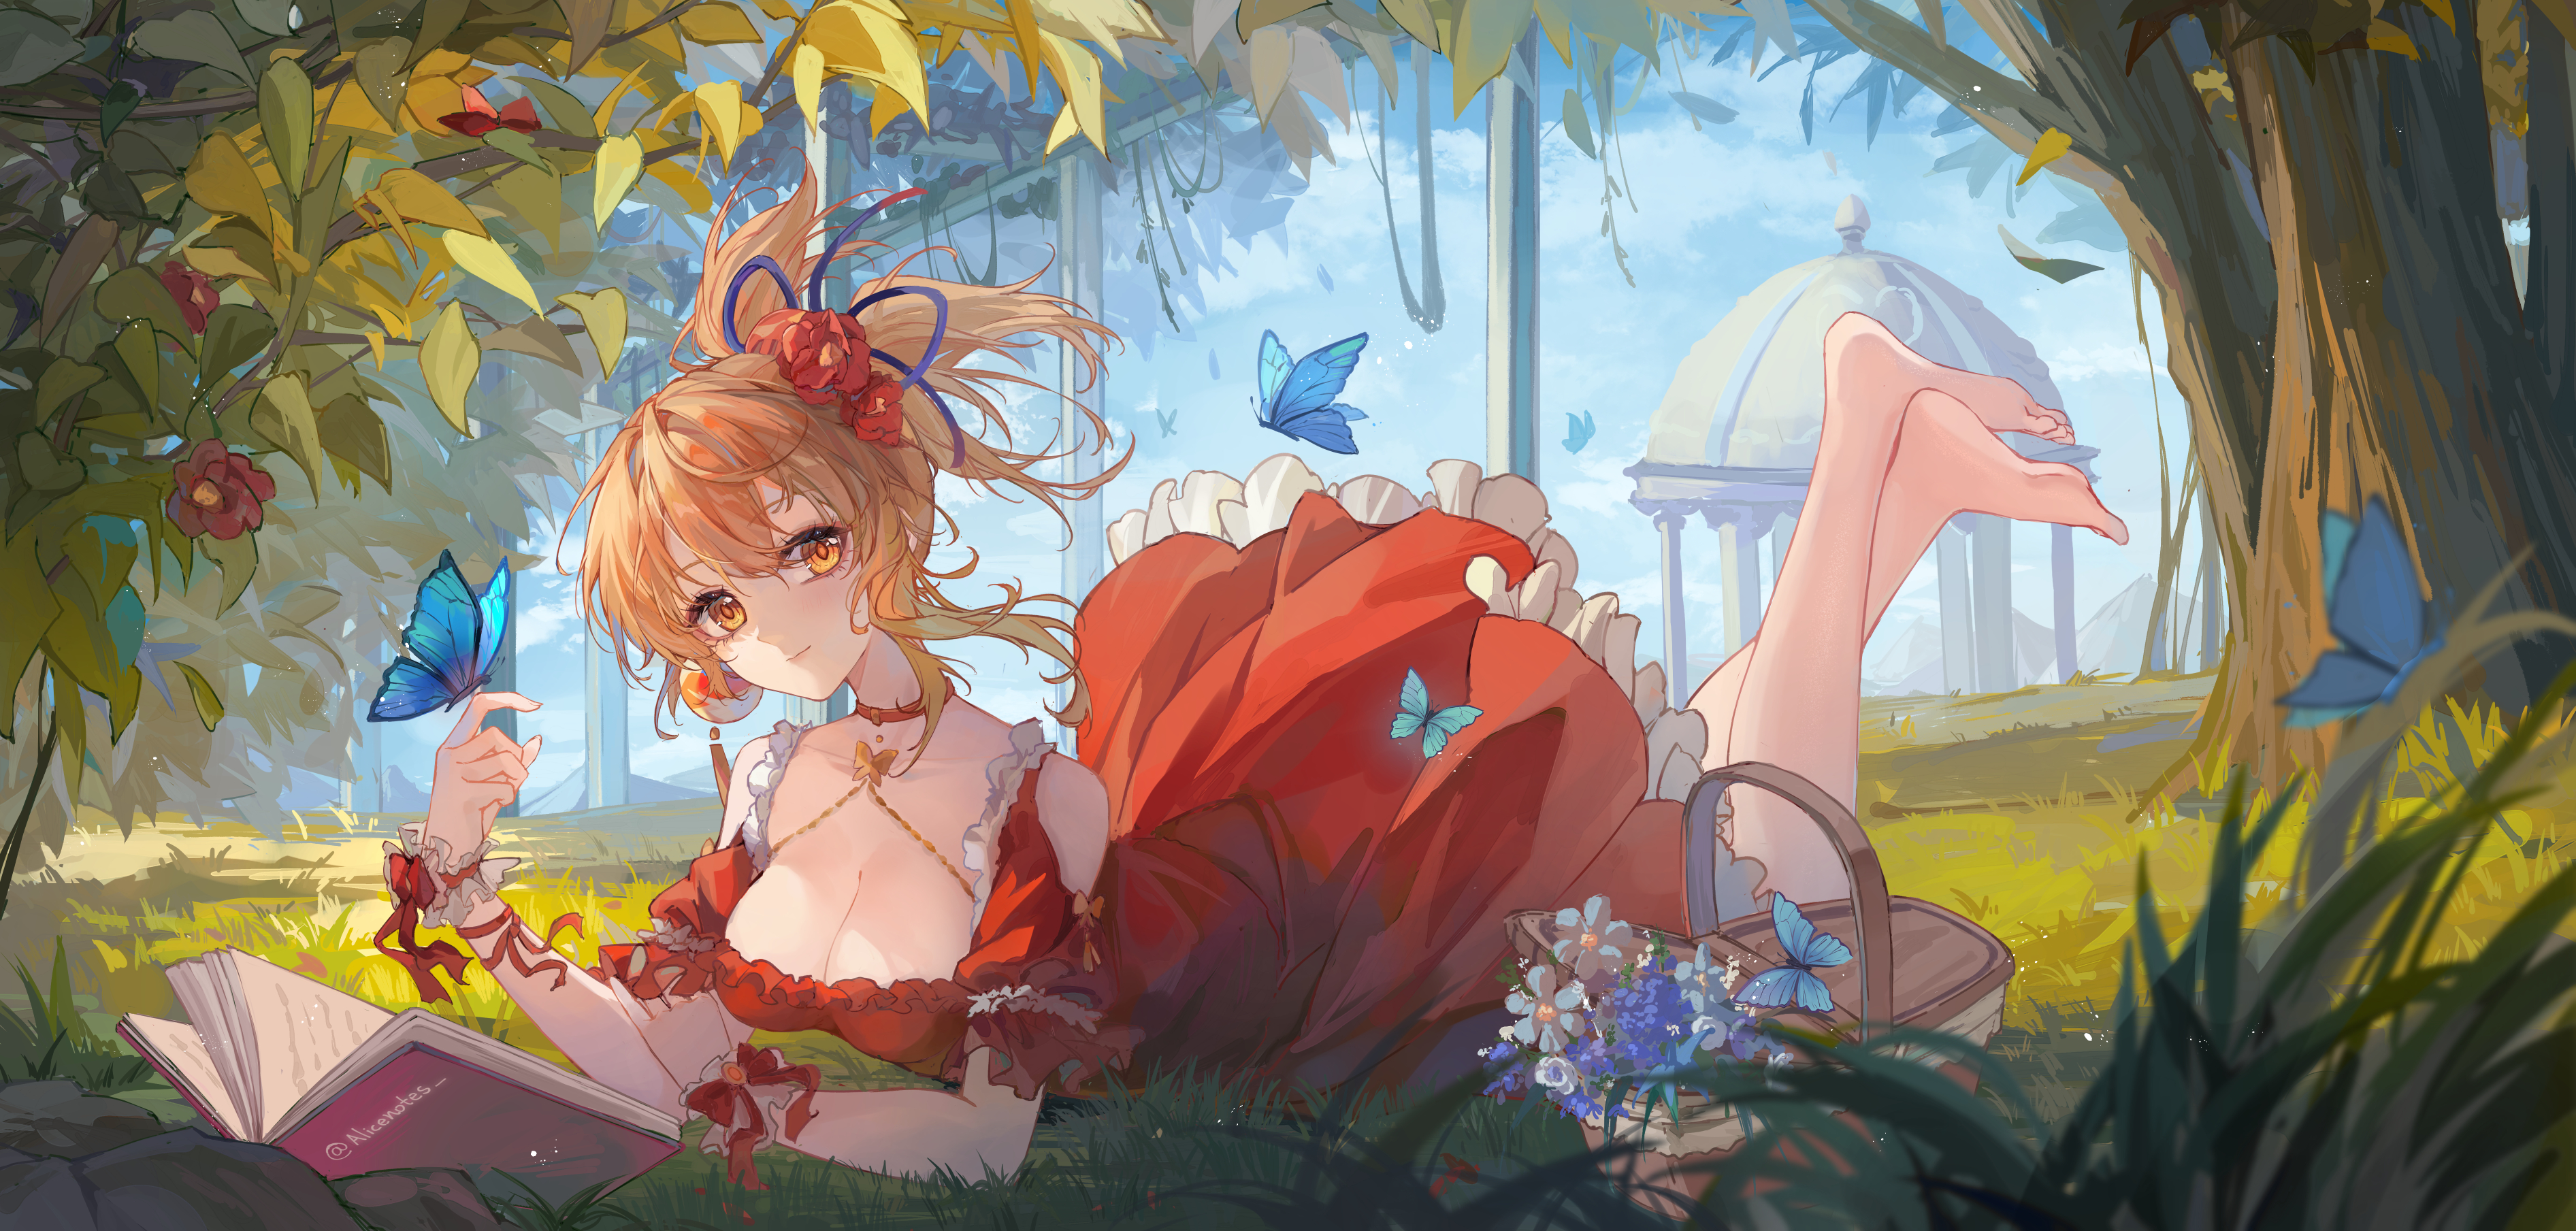 Anime 3785x1809 anime anime girls Genshin Impact cleavage lying on front dress Yoimiya (Genshin Impact) big boobs feet in the air feet butterfly grass leaves flowers books looking at viewer trees baskets sky clouds blonde yellow eyes flower in hair lixiang guo alice